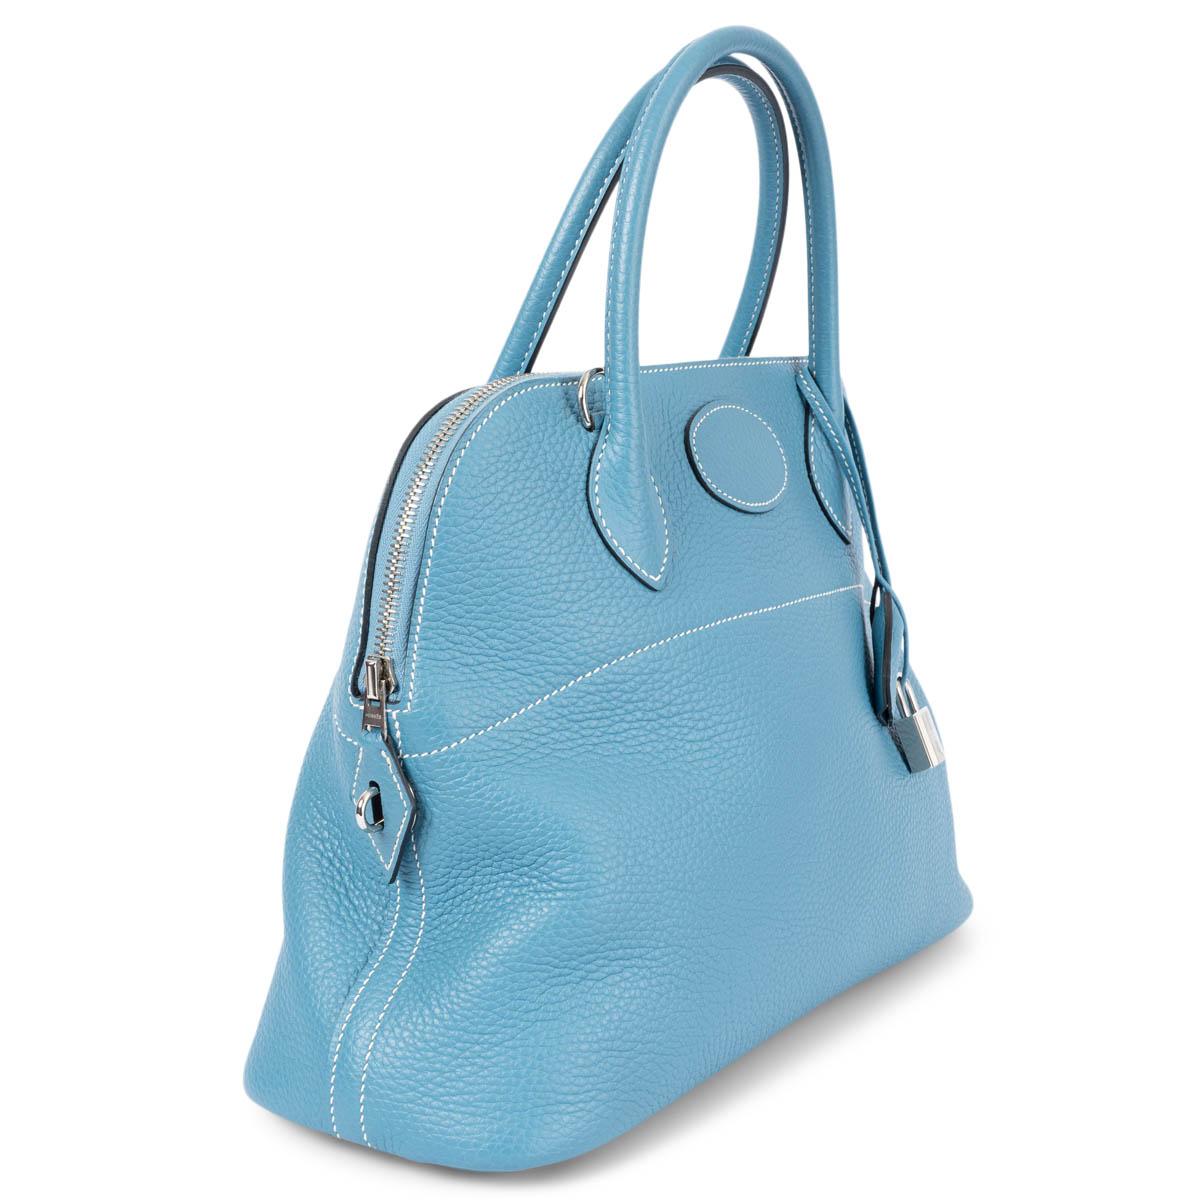 100% authentic Hermes 'Bolide 31' bag in Bleu Jean (light blue) Taurillon Clemence leather with contrasting white stitching and palladium-plated hardware. Opens with a zipper on top. Lined in Bleu Jean lamb skin leather with an open pocket against